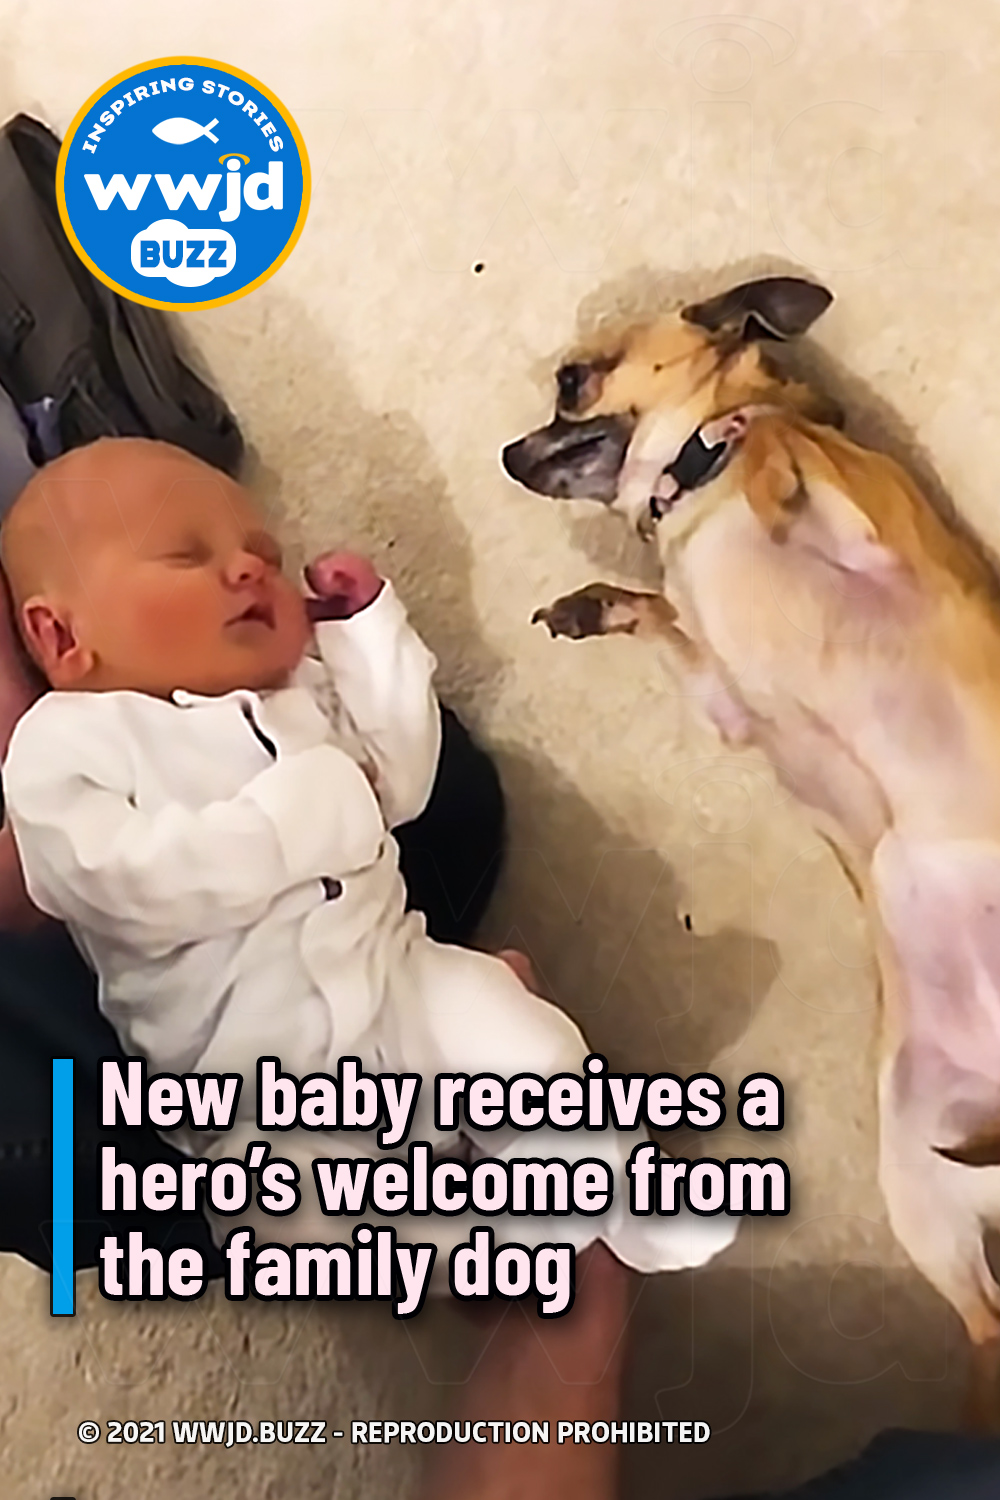 New baby receives a hero’s welcome from the family dog